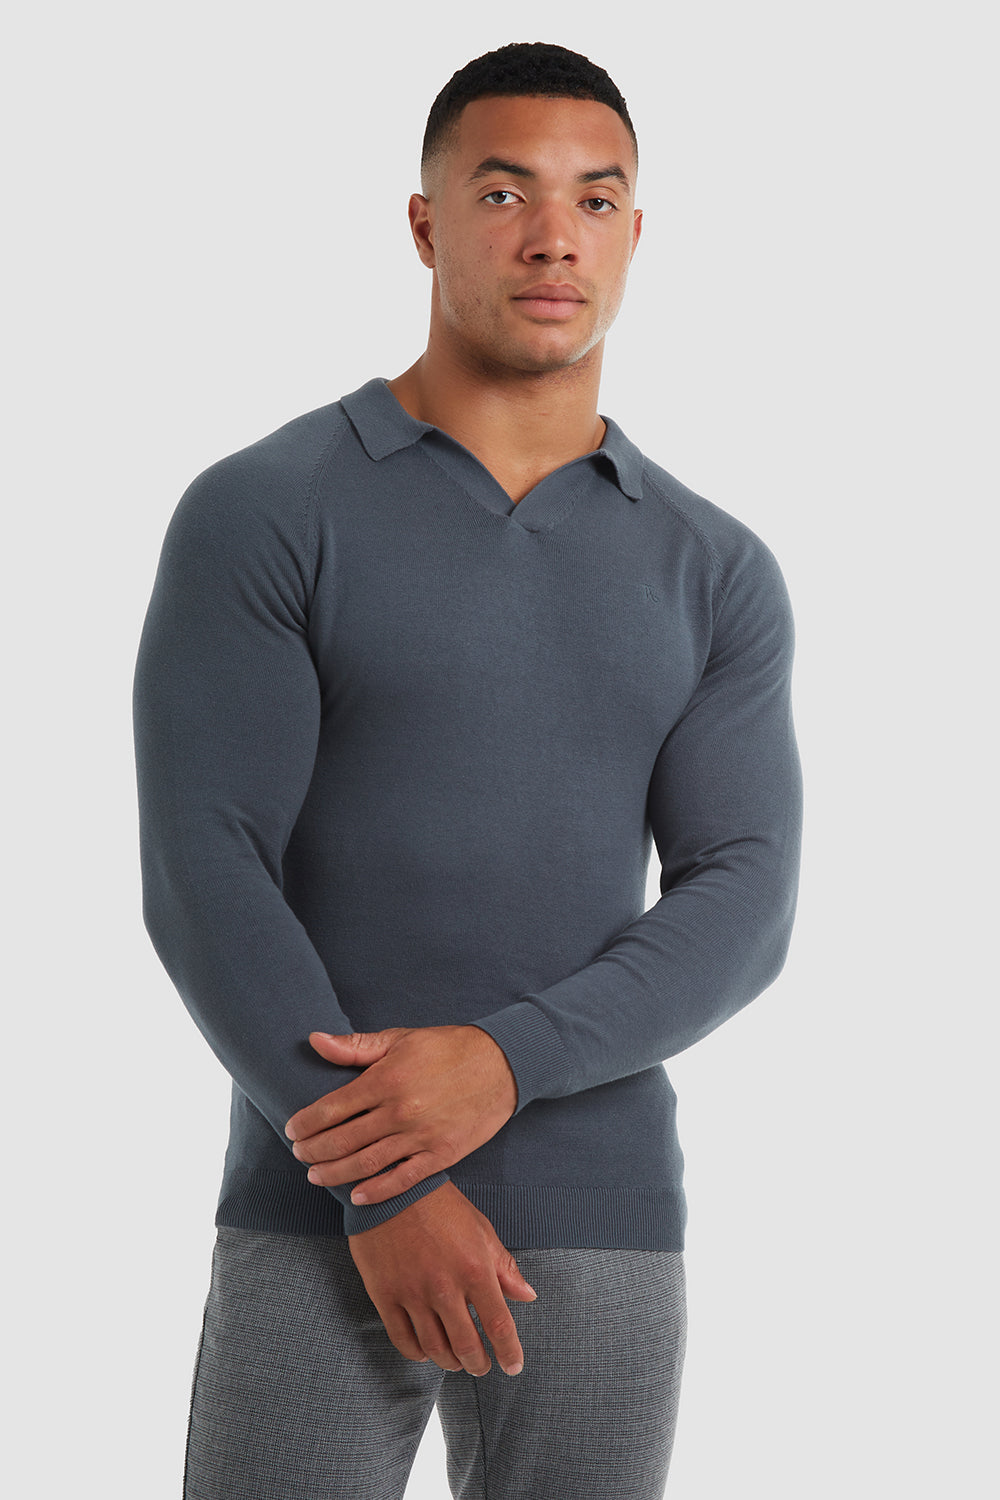 Buttonless Open Collar Polo (LS) in Petrol - TAILORED ATHLETE - ROW